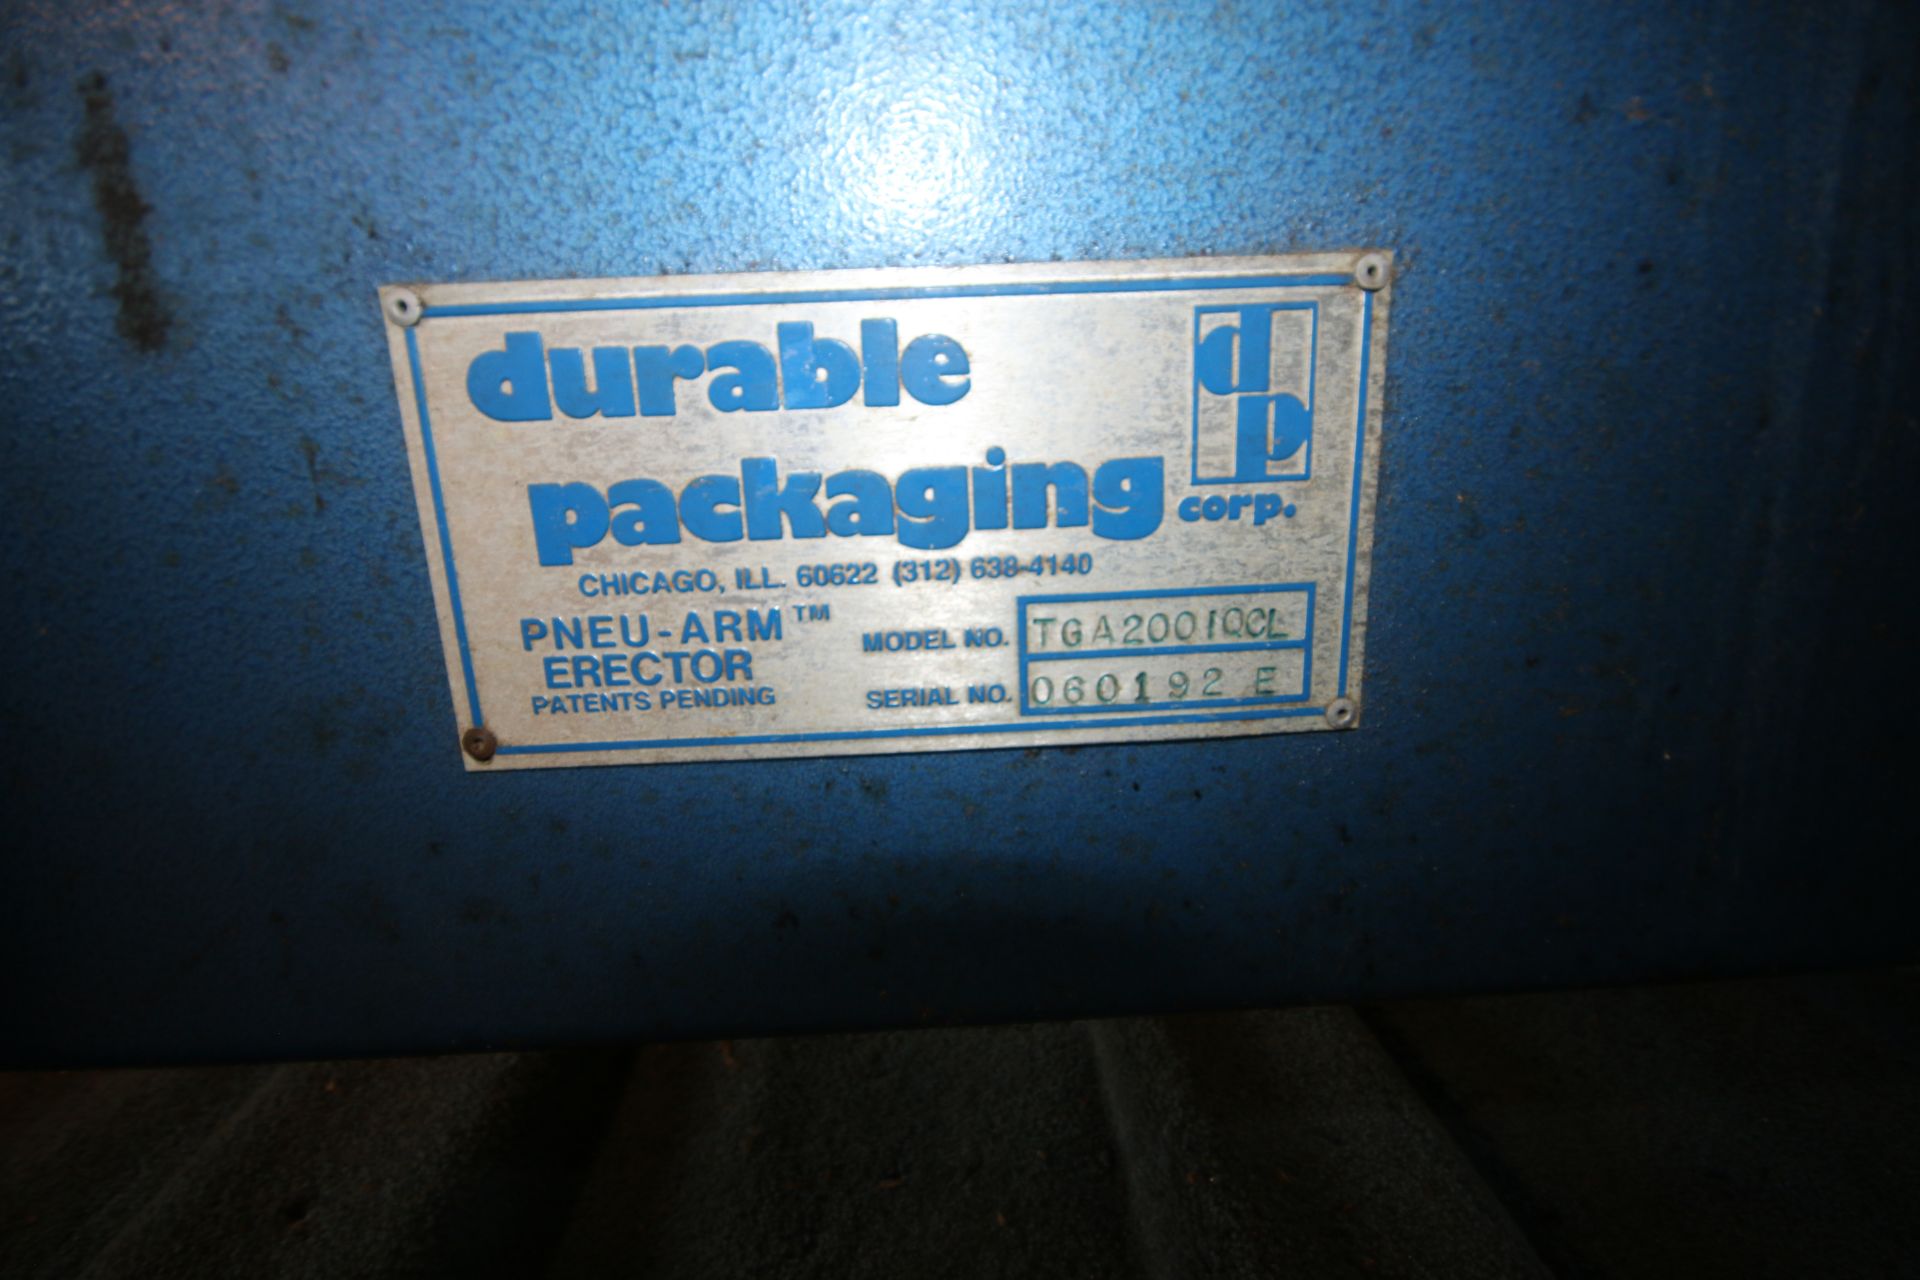 Durable Packaging Pneu-Arm Erector,M/N TGA2001QCL, S/N 060192E, Mounted On Legs(INV#69377) ( - Image 8 of 8